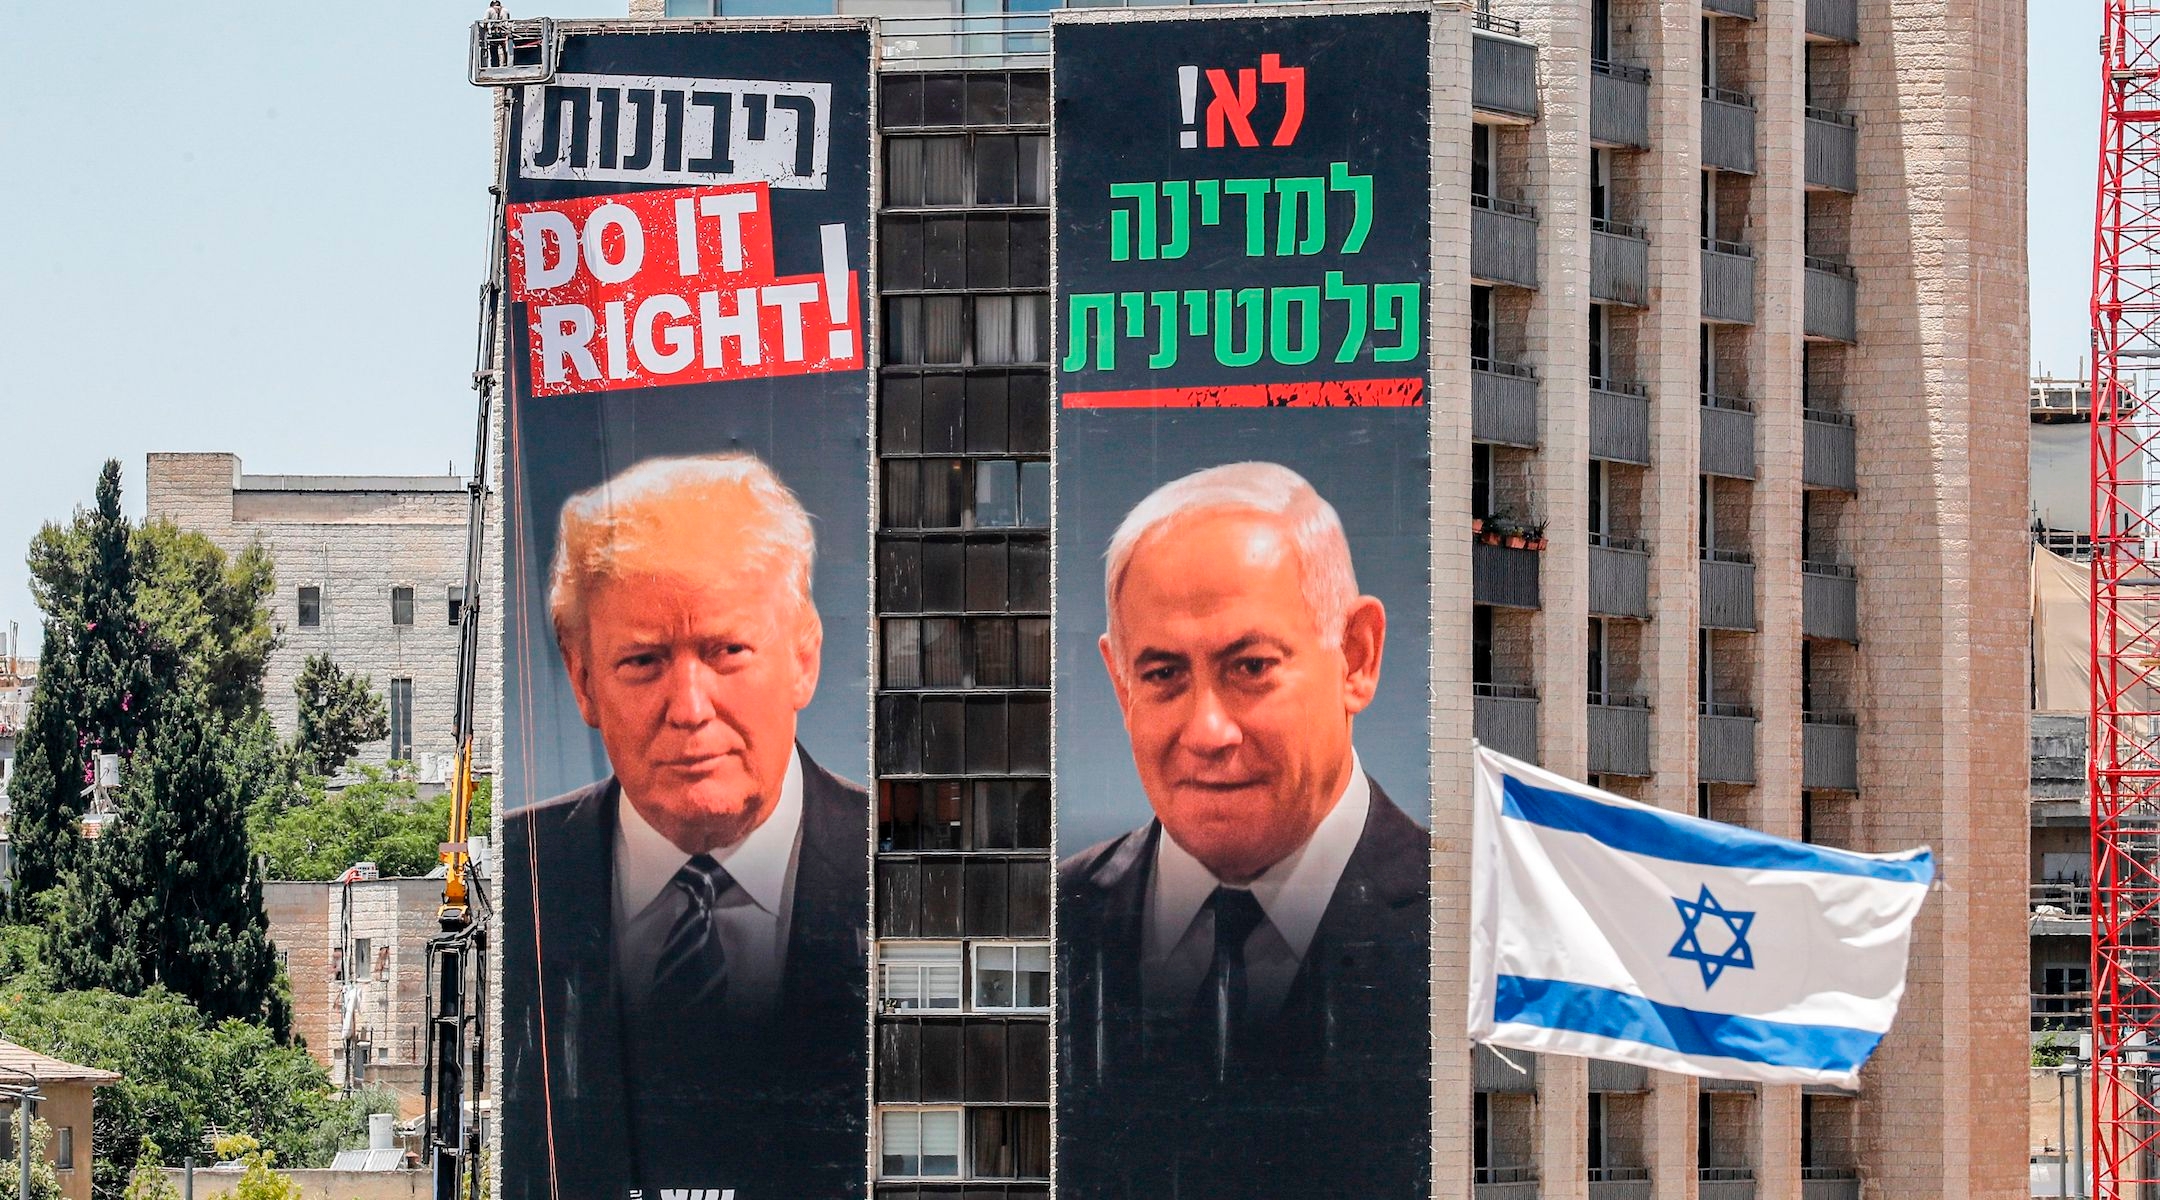 Giant posters on buildings in Jerusalem feature photos of Israeli Prime Minister Benjamin Netanyahu (right) and President Donald Trump, beneath slogans supporting West Bank annexation and opposing a Palestinian state. They were hung by the Yesha Council, an umbrella organization of Israeli settlements in the West Bank, which is split on Netanyahu's annexation plan. (Ahmad Gharbali/AFP via Getty Images)